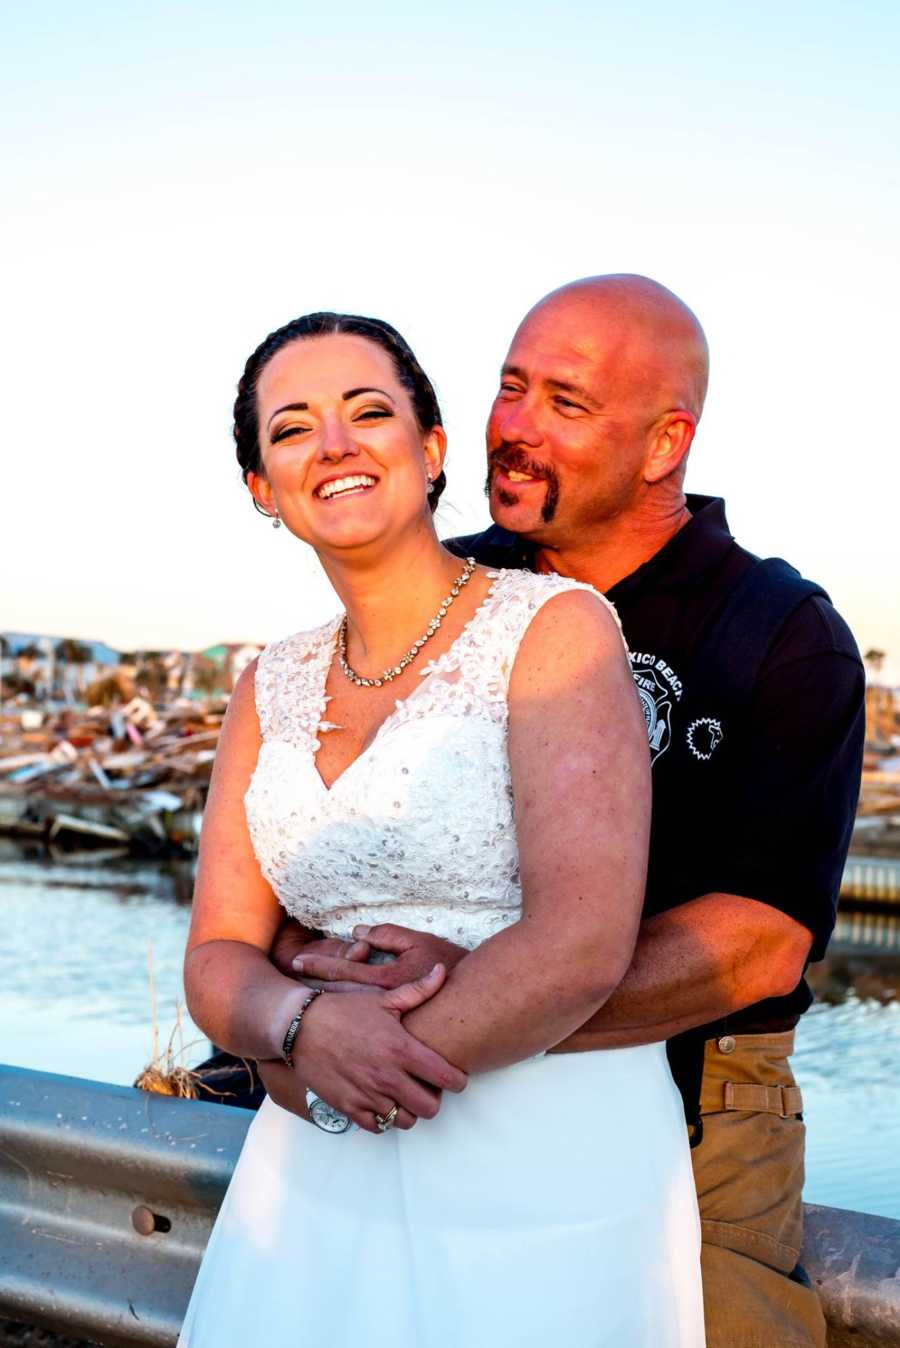 Groom holds bride from behind smiling near body of water